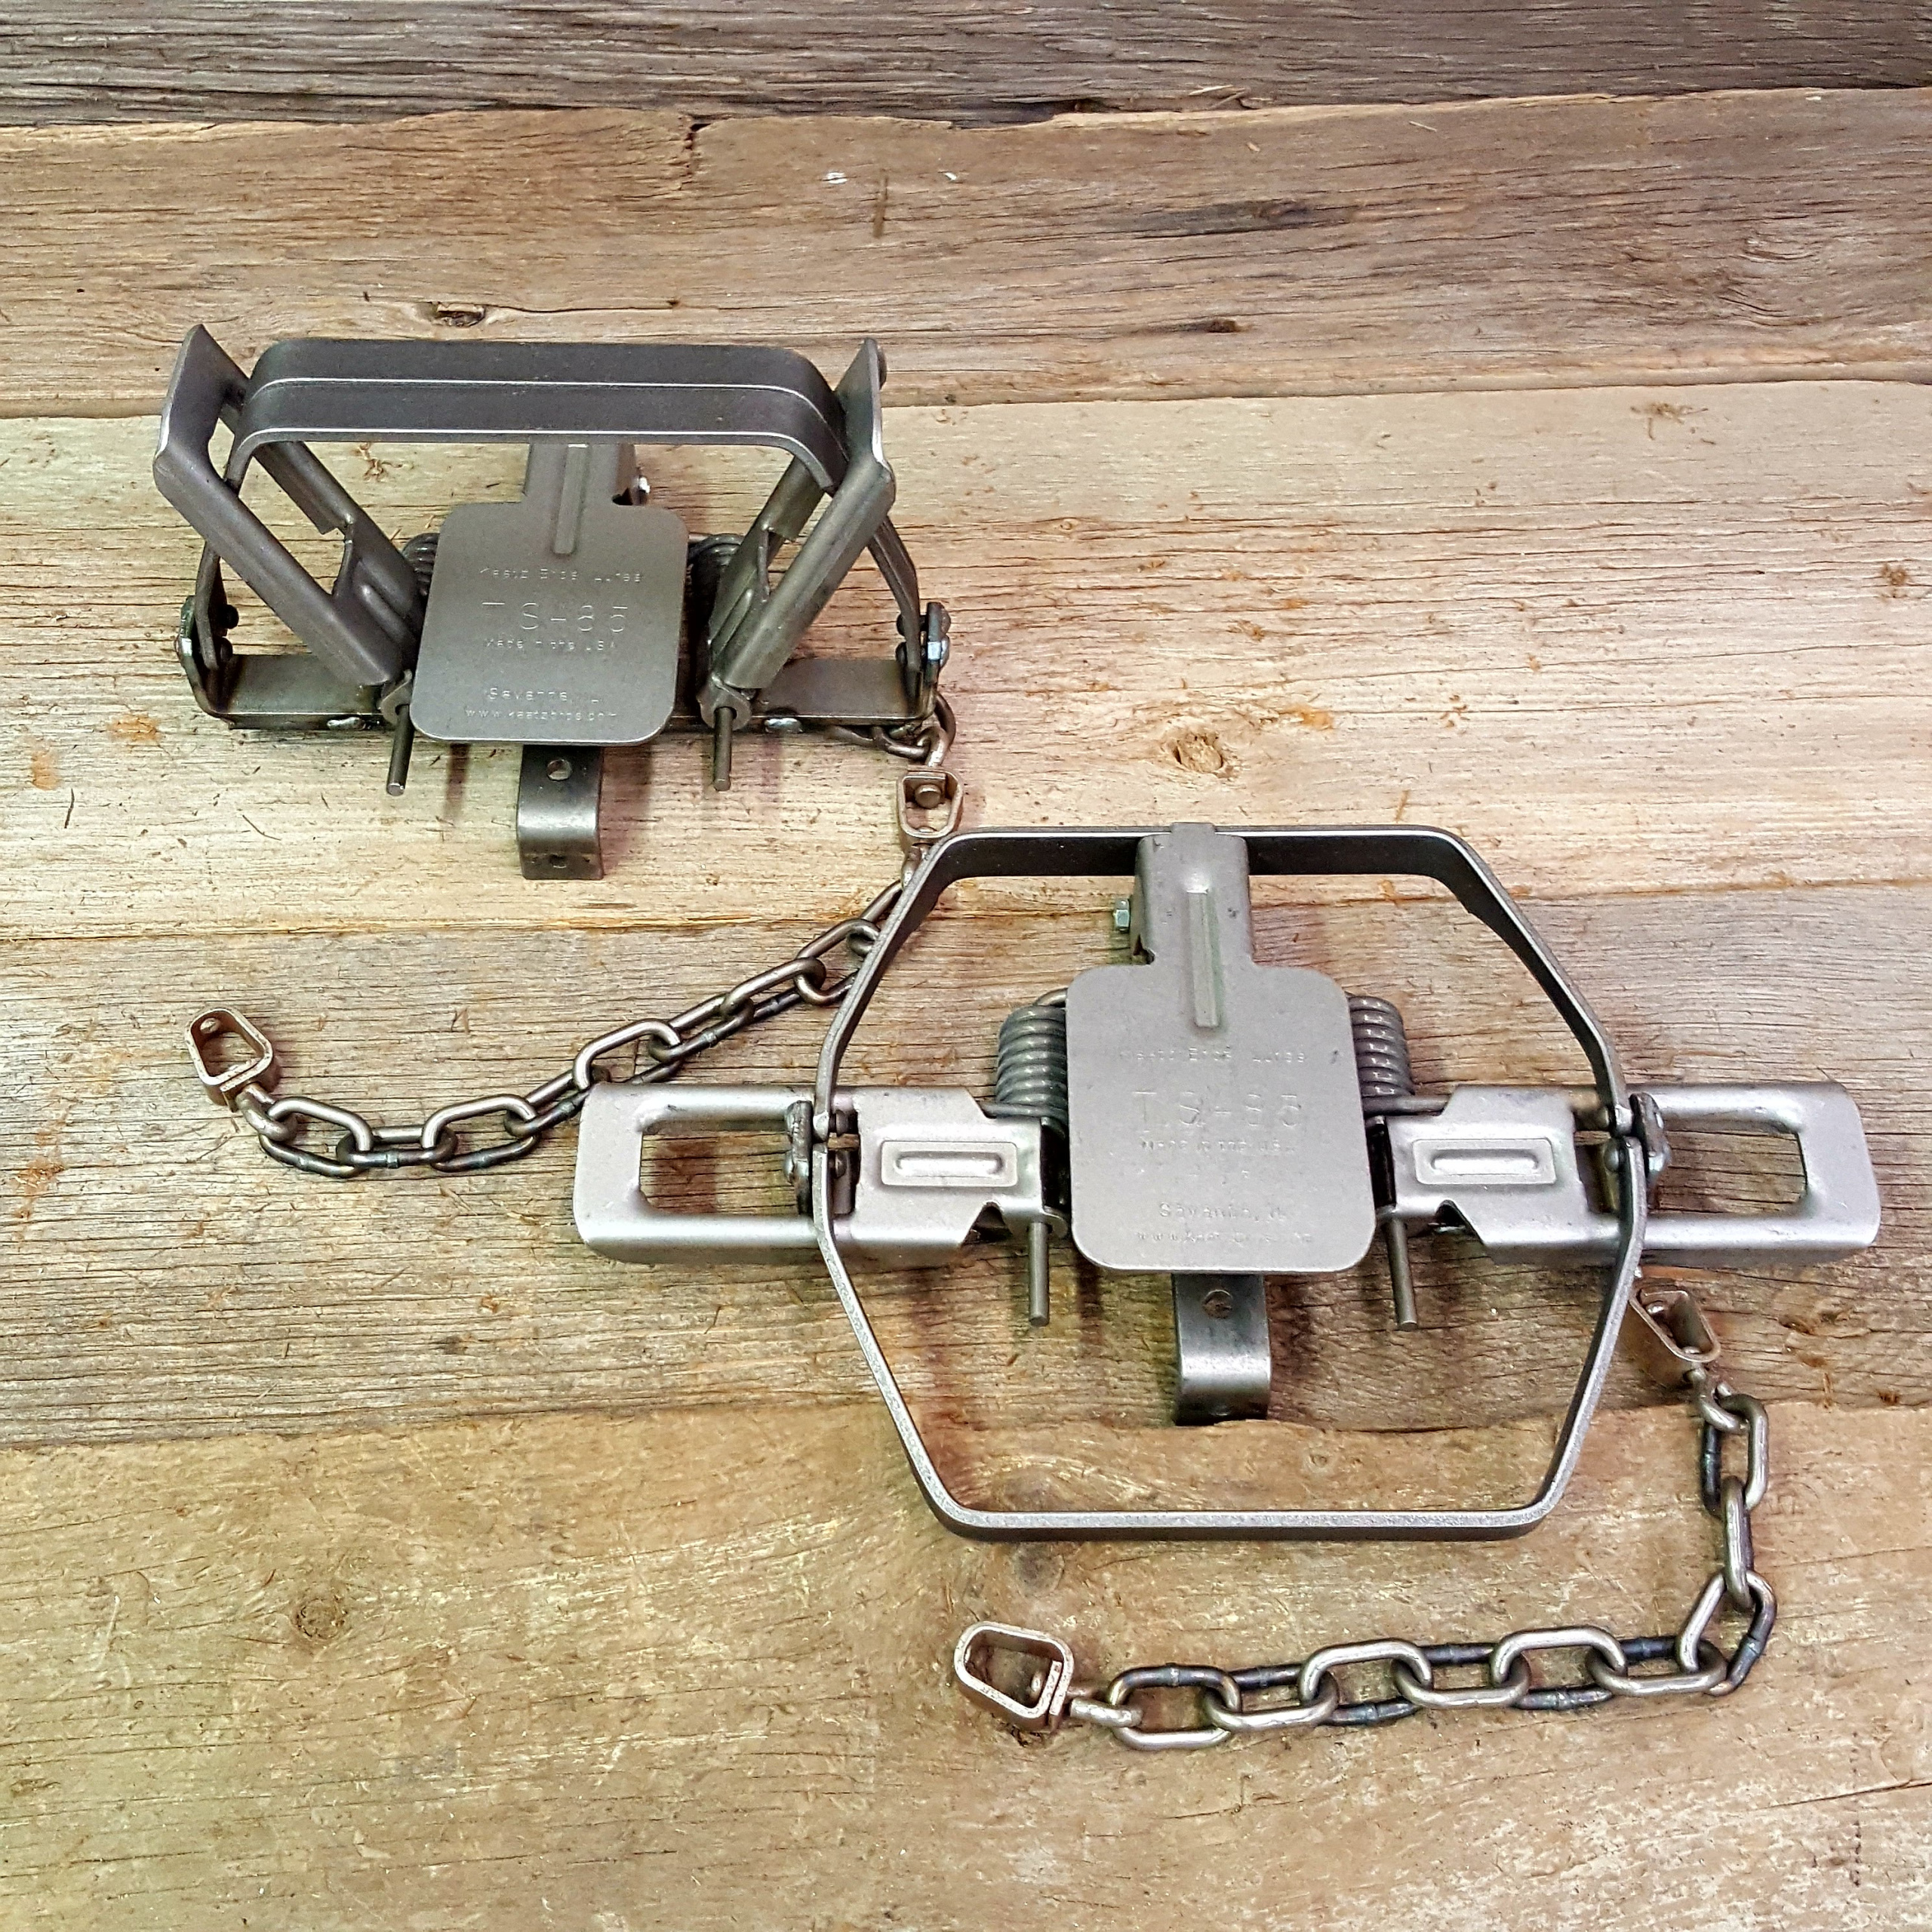 2 TS-85 TRAP HEAVY DUTY BEAVER TRAP 2 COIL GREAT FOR WOLF AND